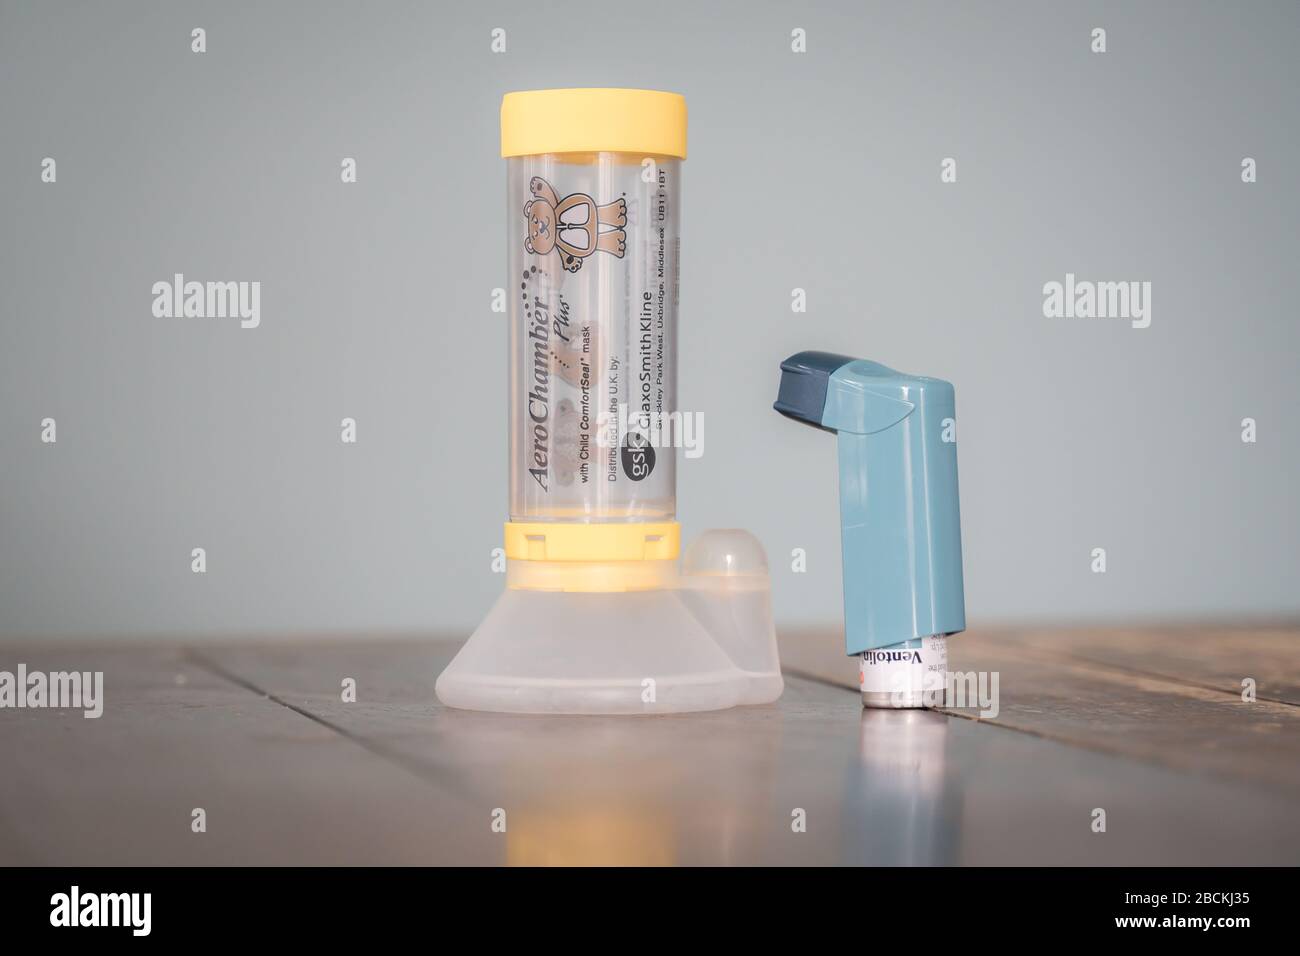 London, UK - April 3, 2020 - Ventolin metered dose inhaler and Aerochamber spacer; commonly prescribed medication for asthma treatment Stock Photo